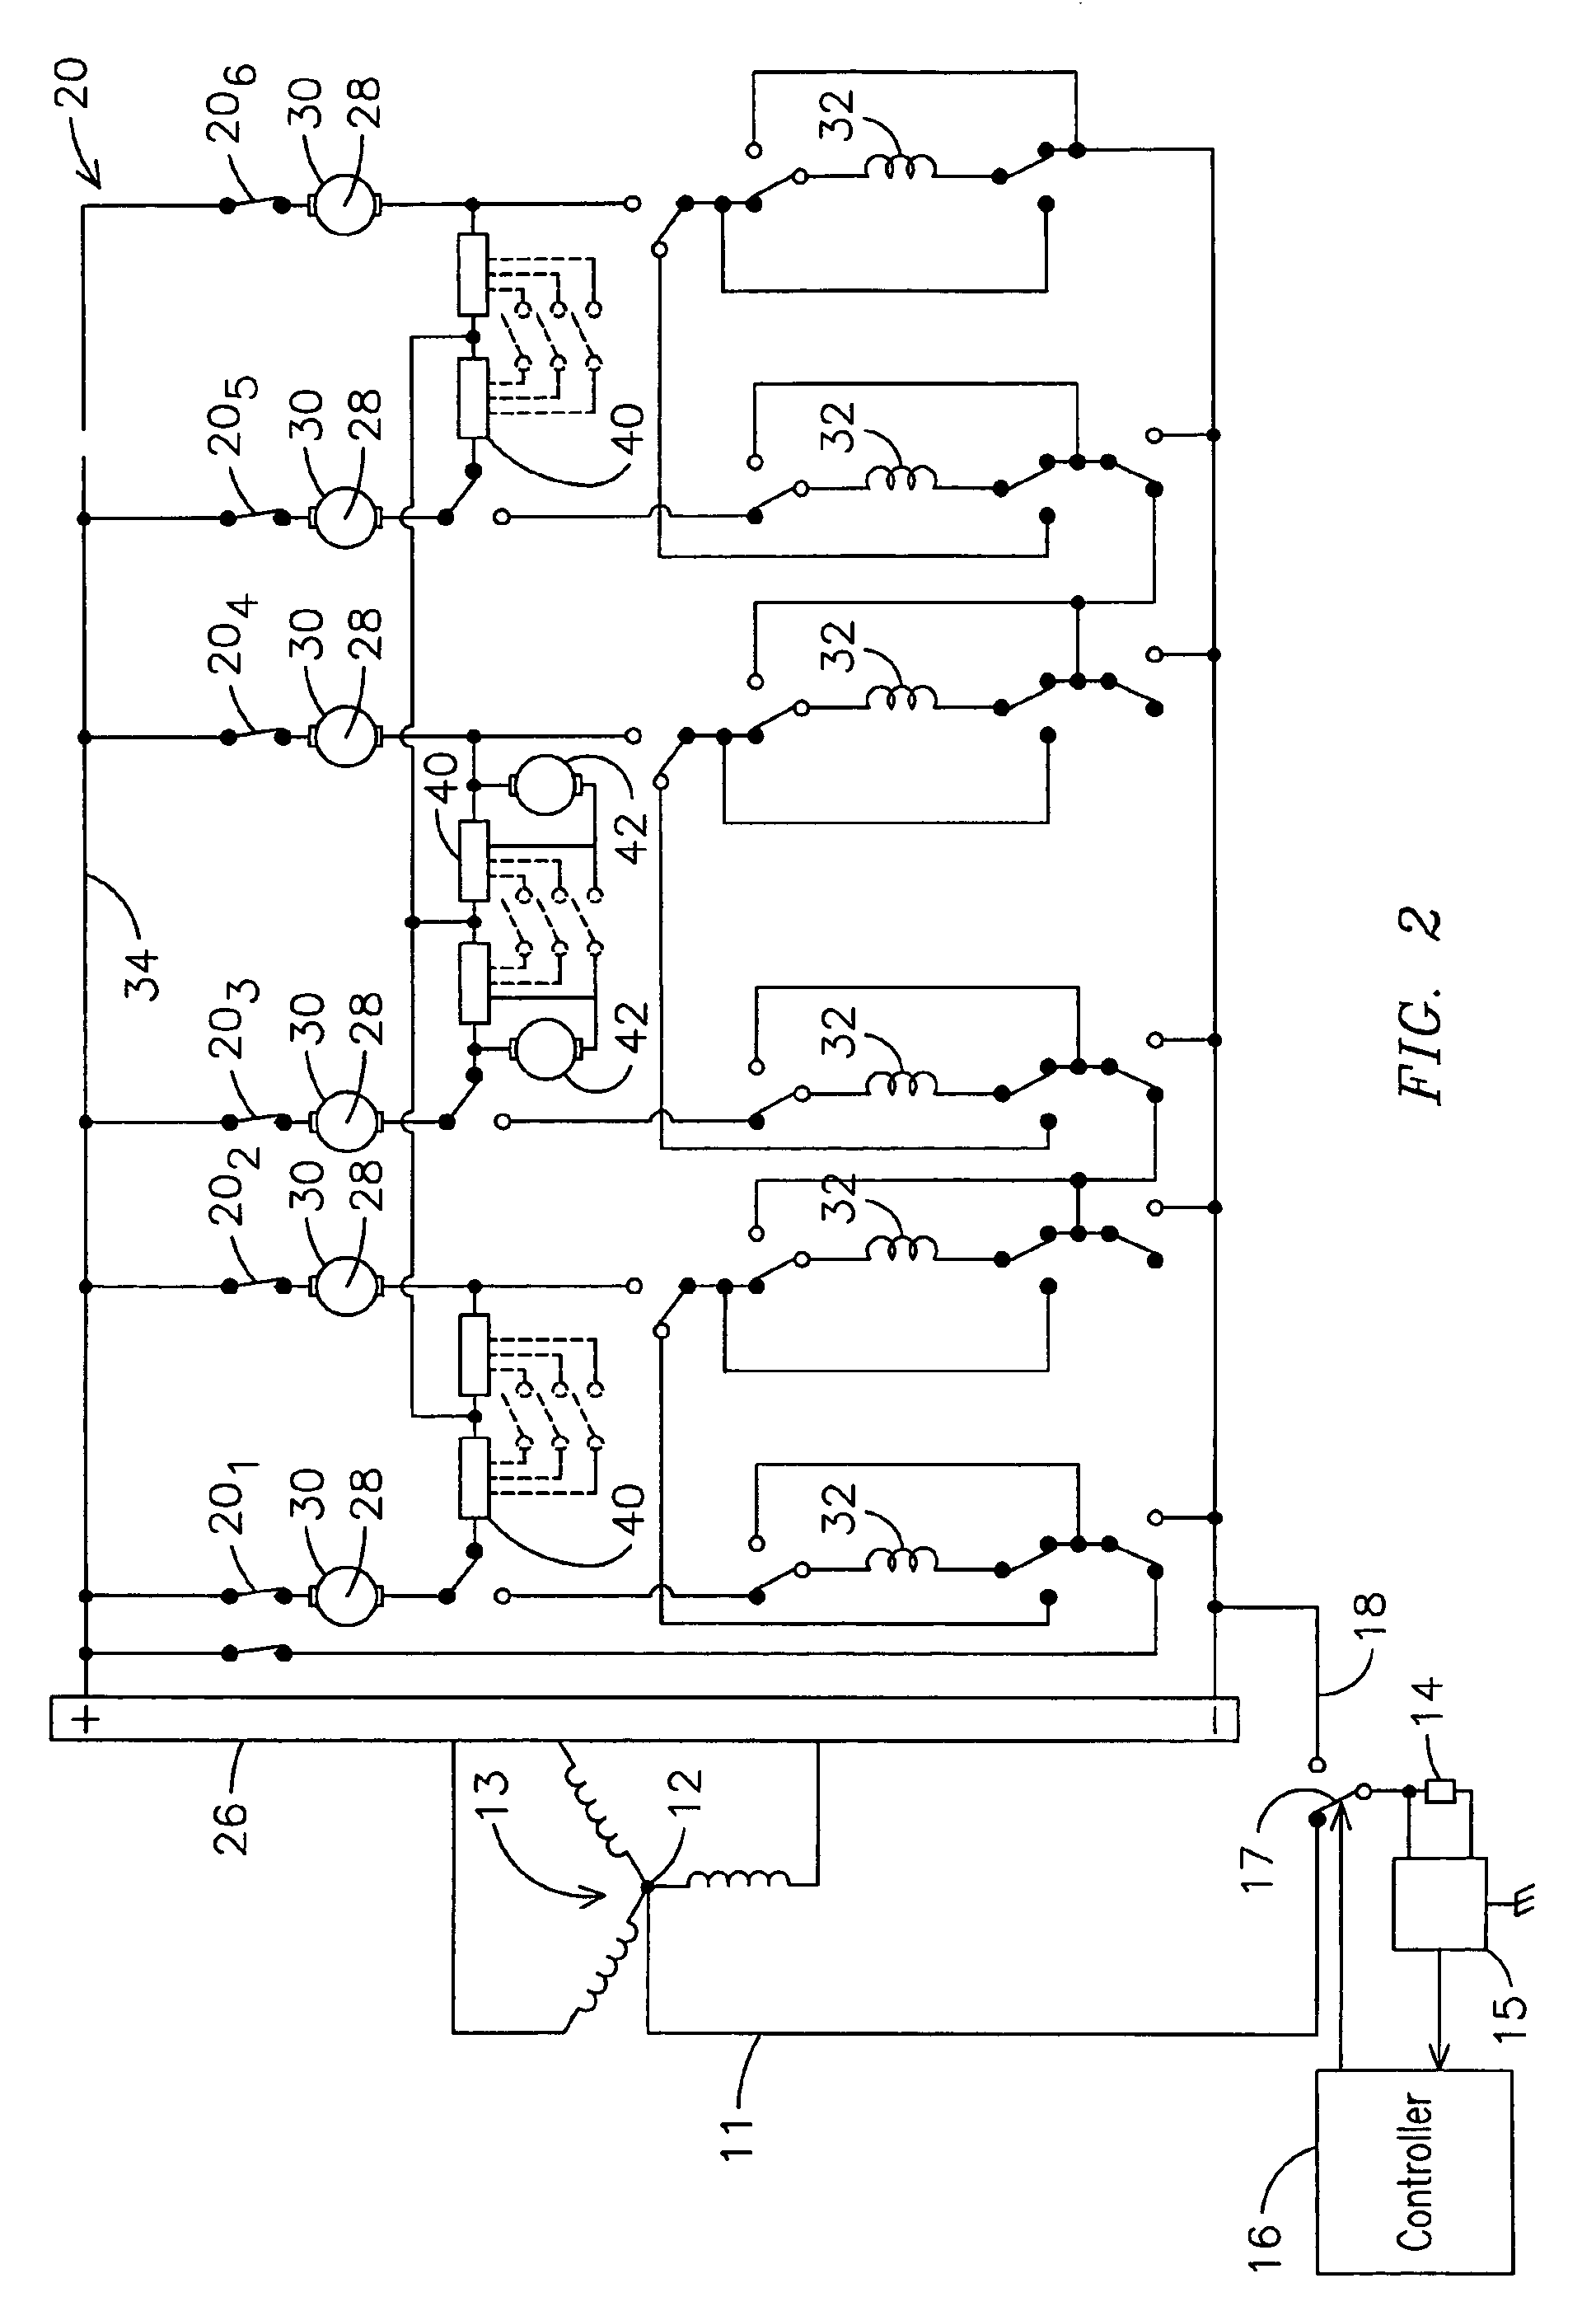 System and method for dealing with ground fault conditions that can arise in an electrical propulsion system